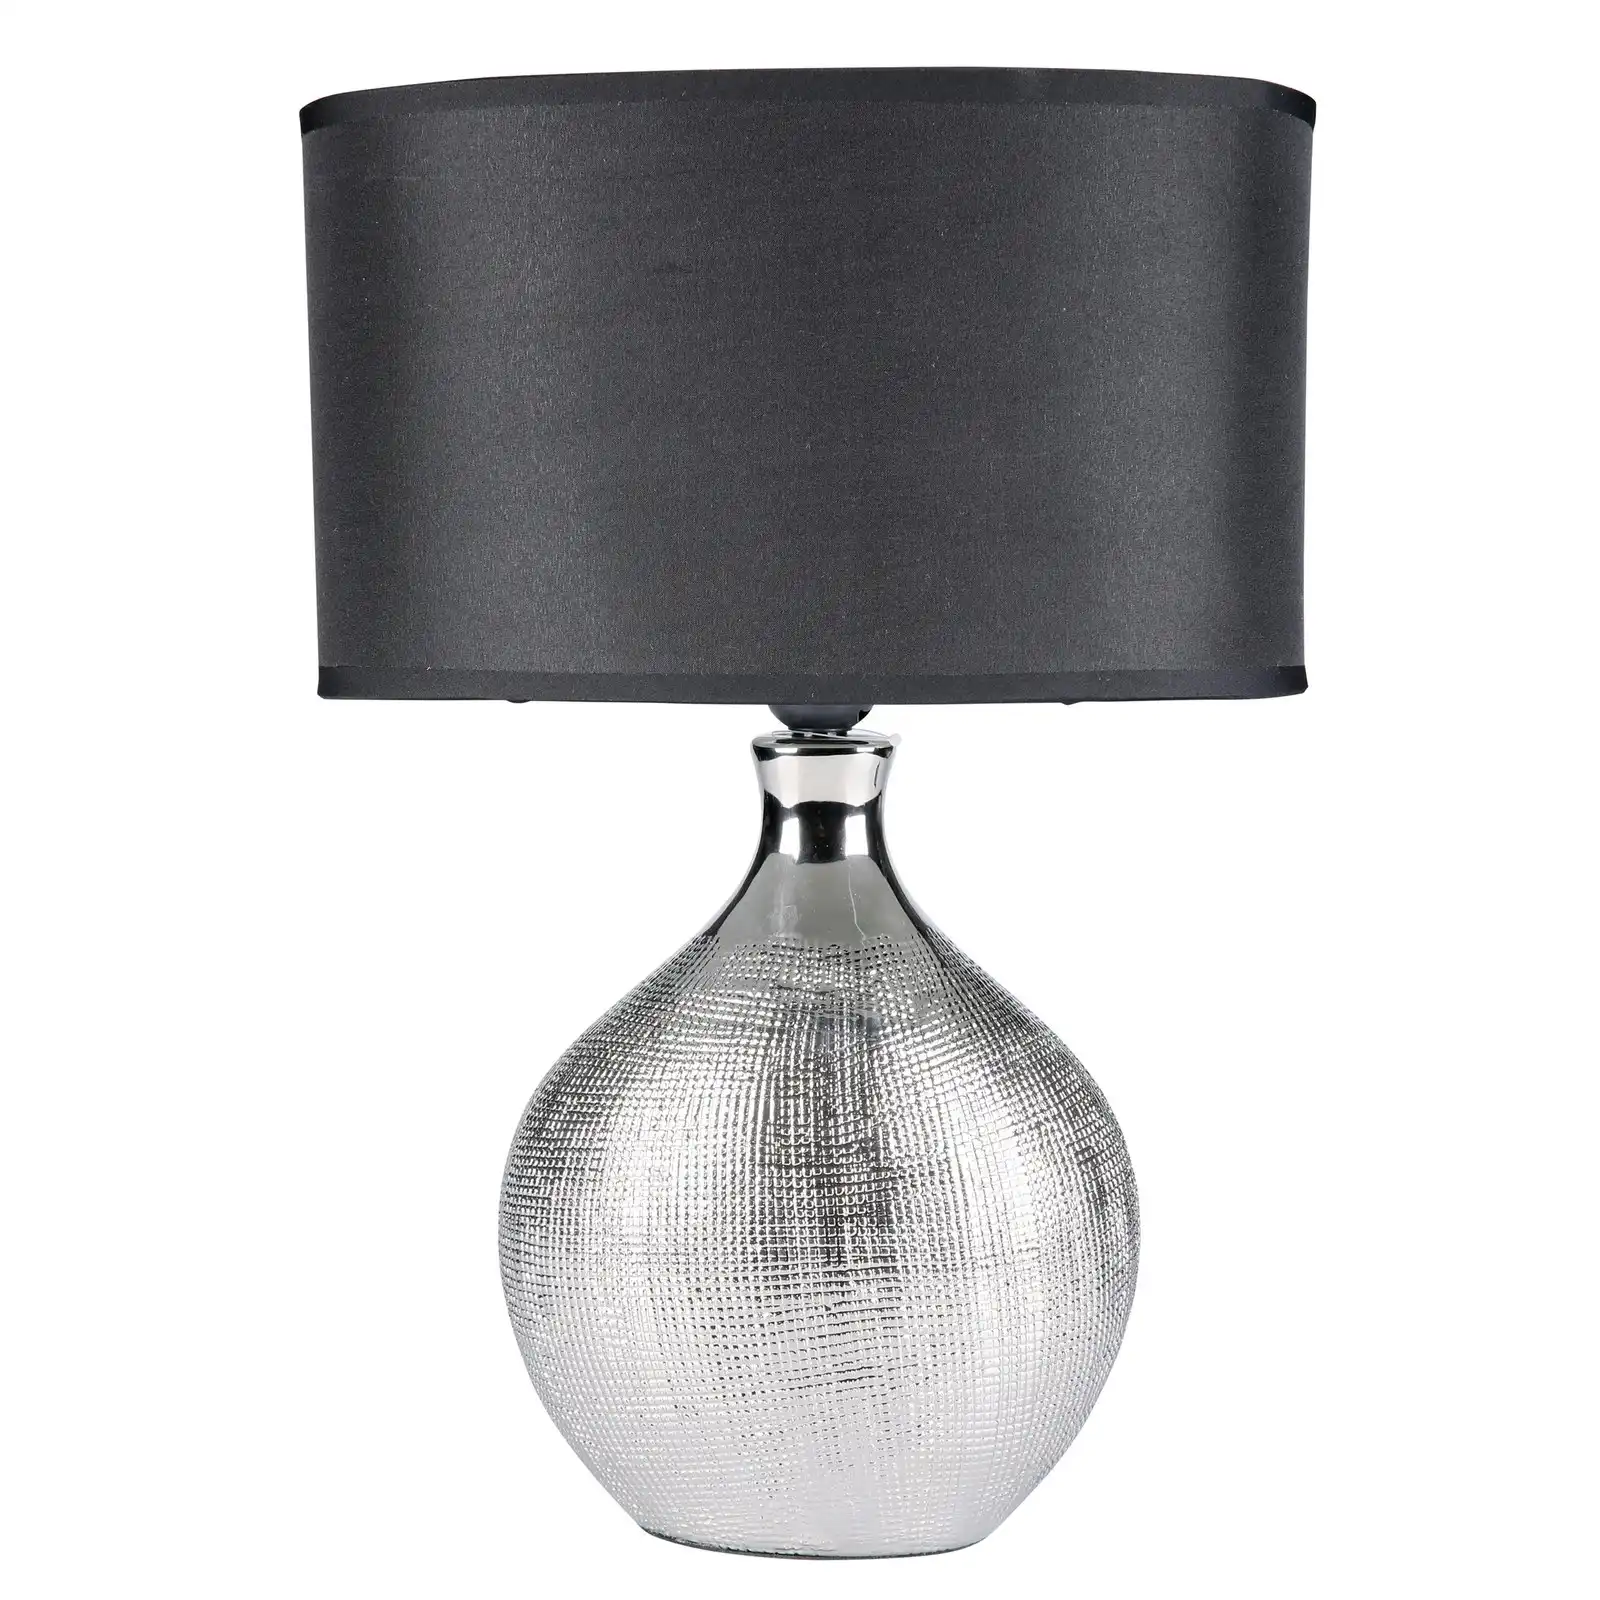 Sherwood Lighting Cosmo Contemporary Bedside Table Lamp - Art Deco Textured - Silver